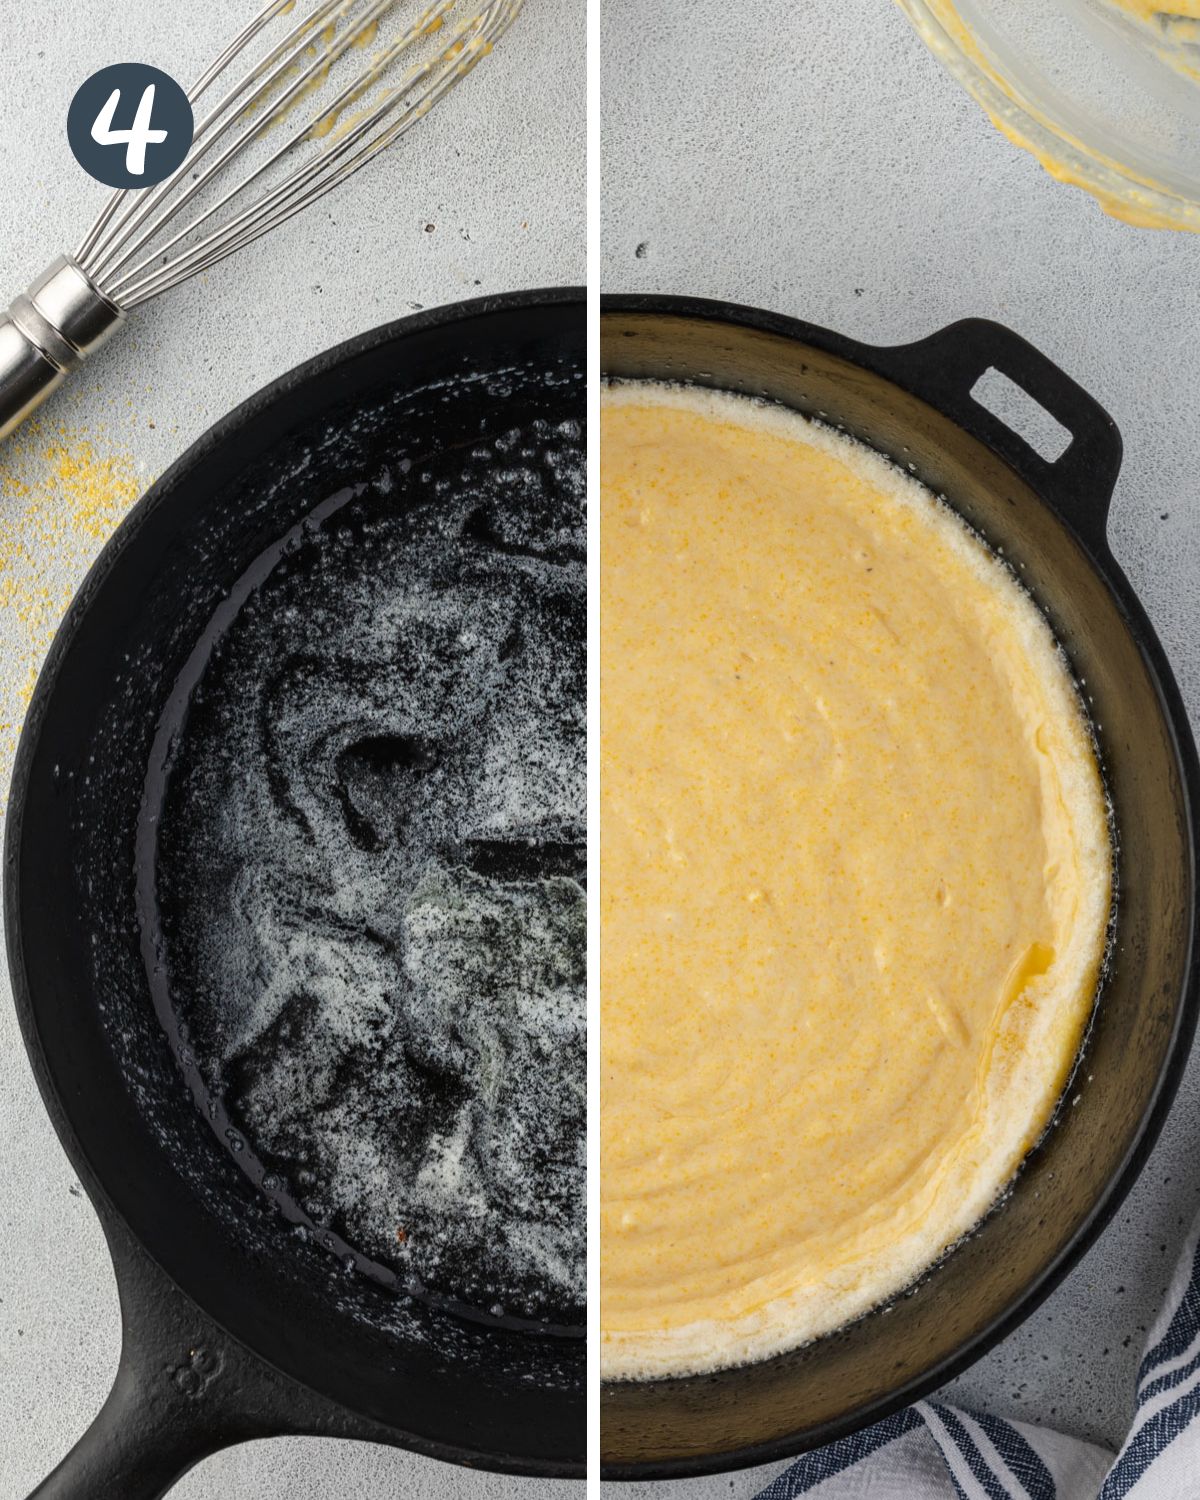 Split image: Left showing butter melted in cast iron, right the batter is poured in.